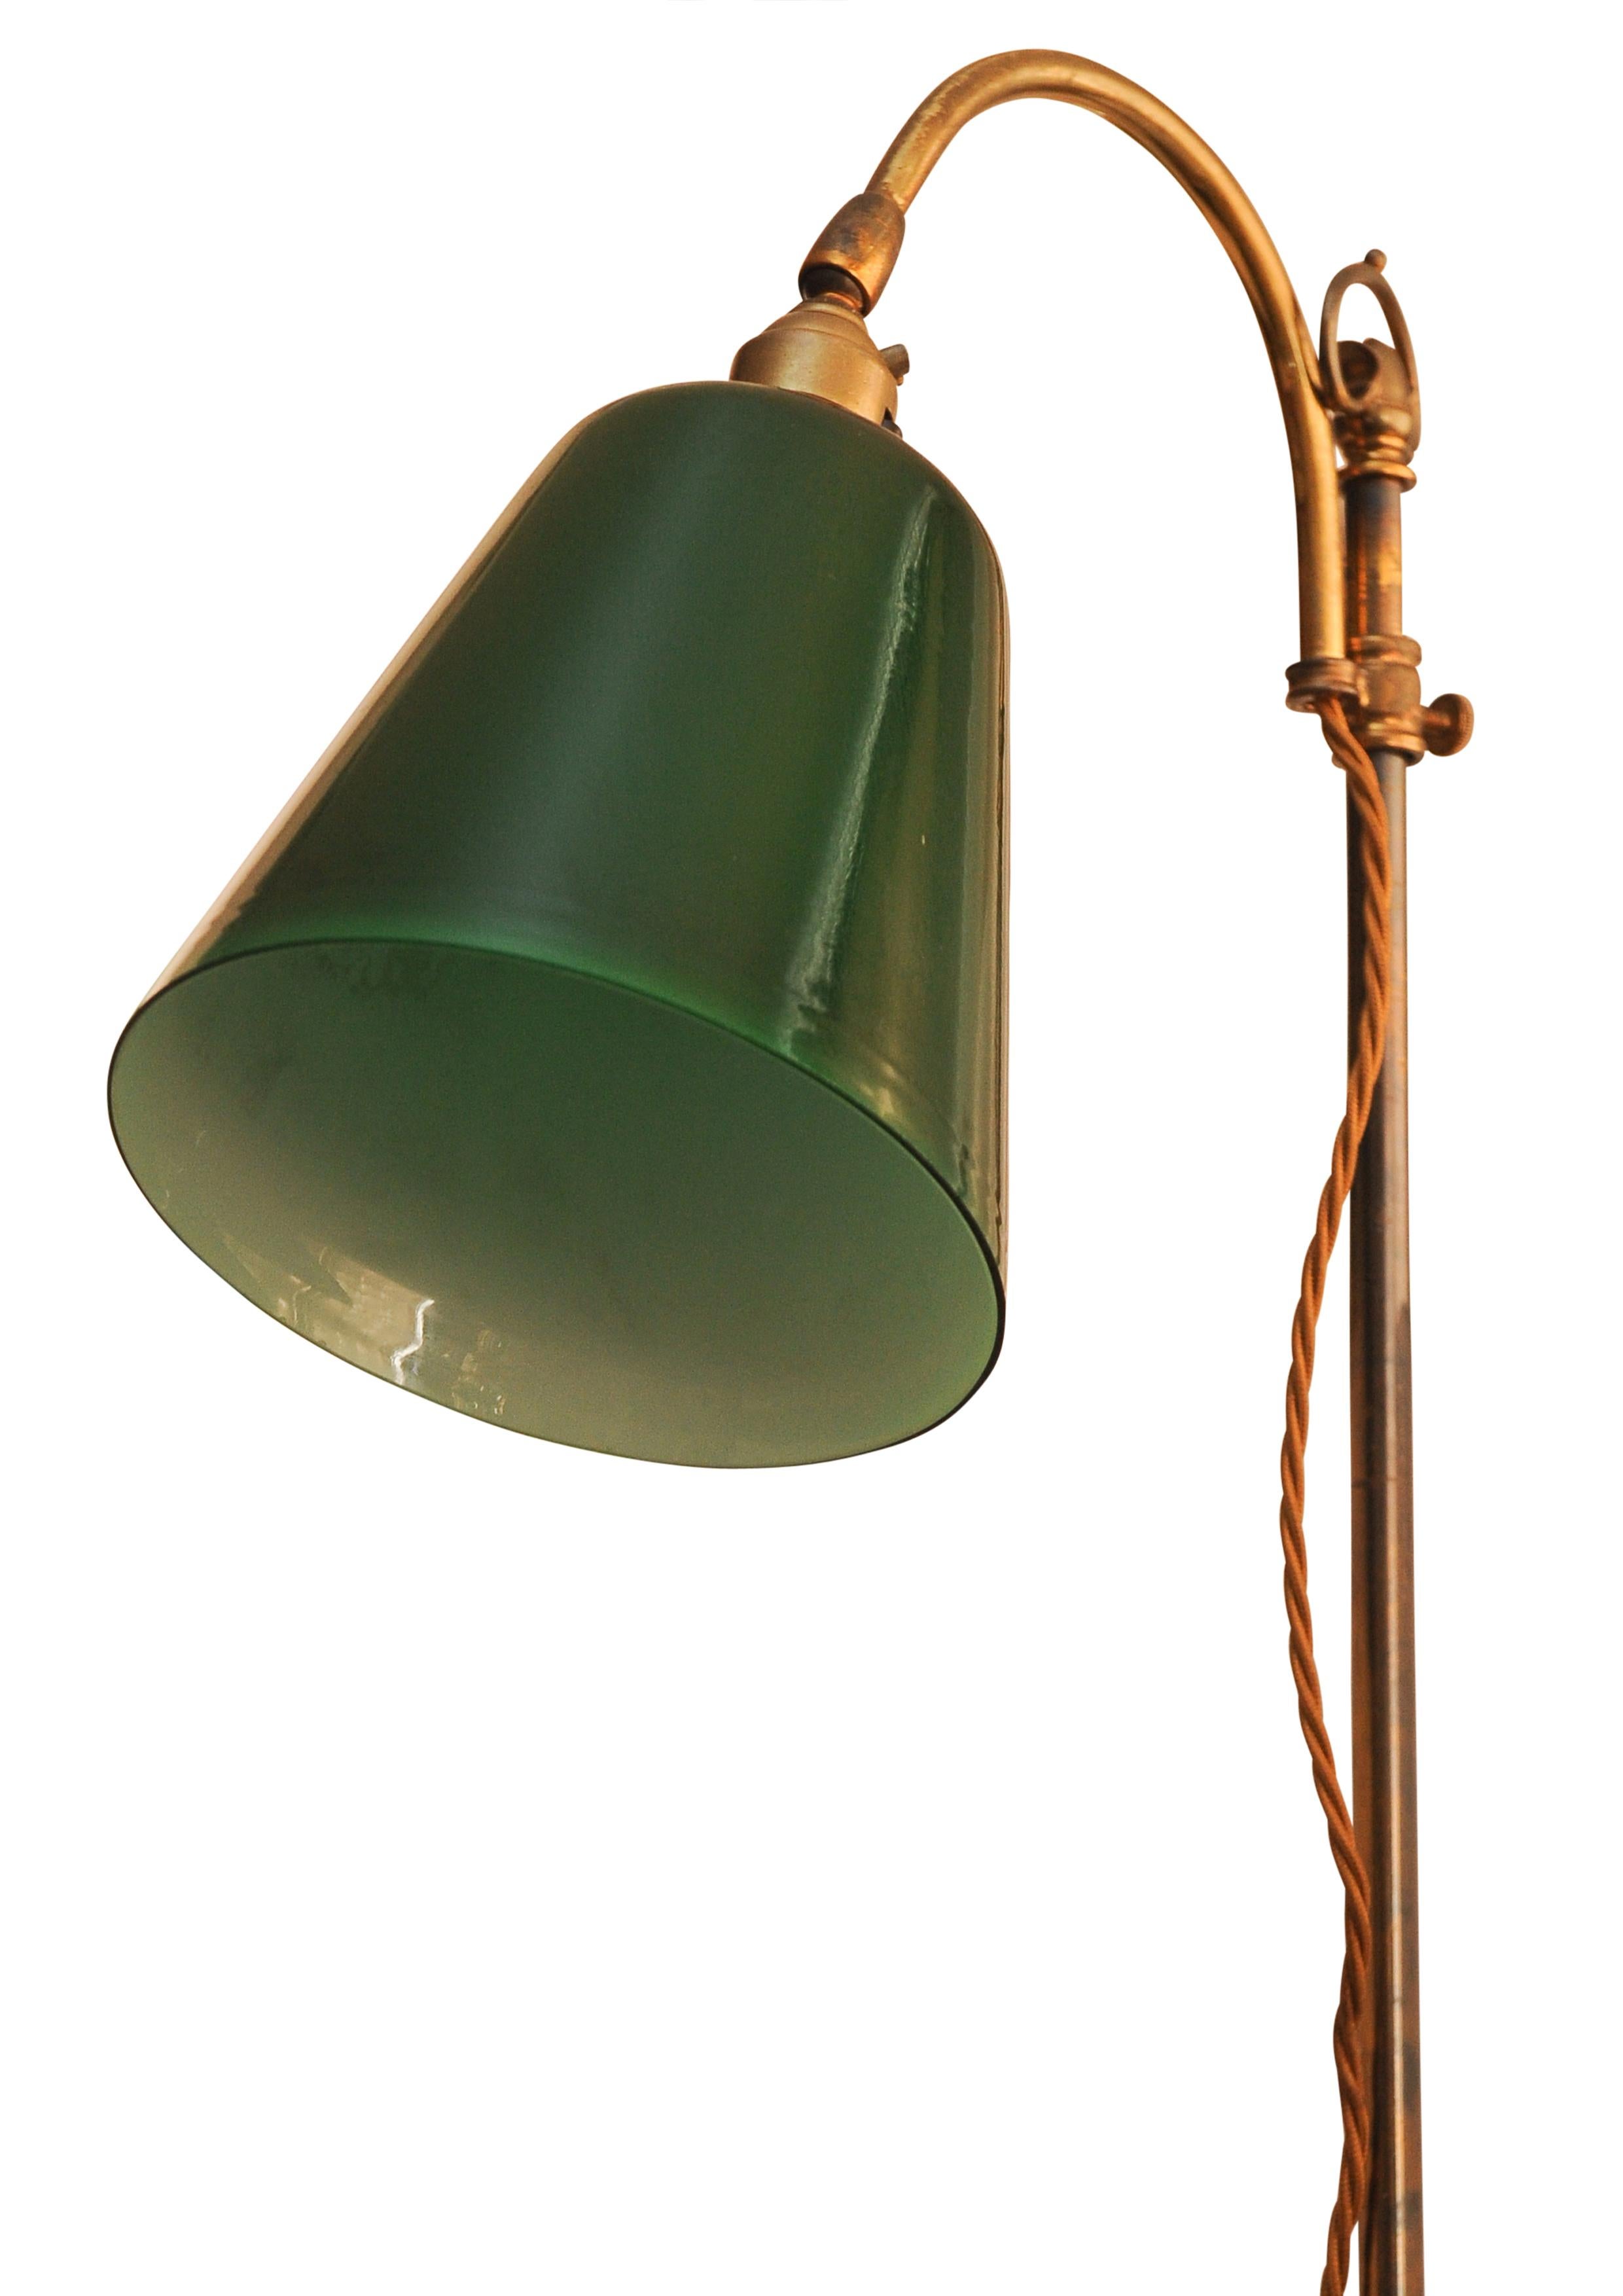 Antique Student Desk Lamp With Racing Green Glass Shade.

Shade is adjustable by by height to offer different positions for reading. 


